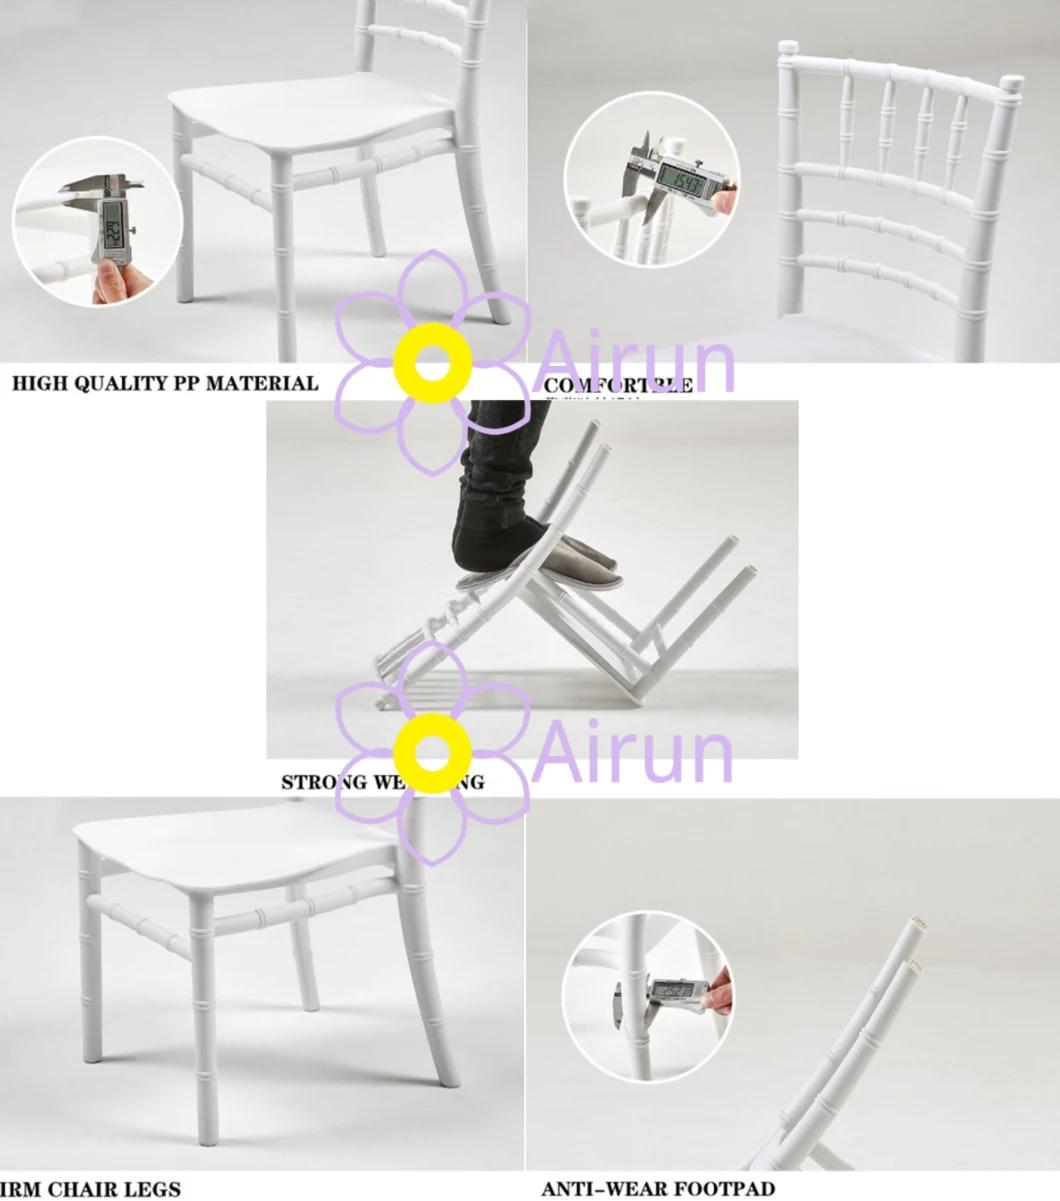 Kids Chair Hotel Party Chairs White Cheap China Event Luxury Fancy Banquet Wedding Tiffany Party Chair for Children